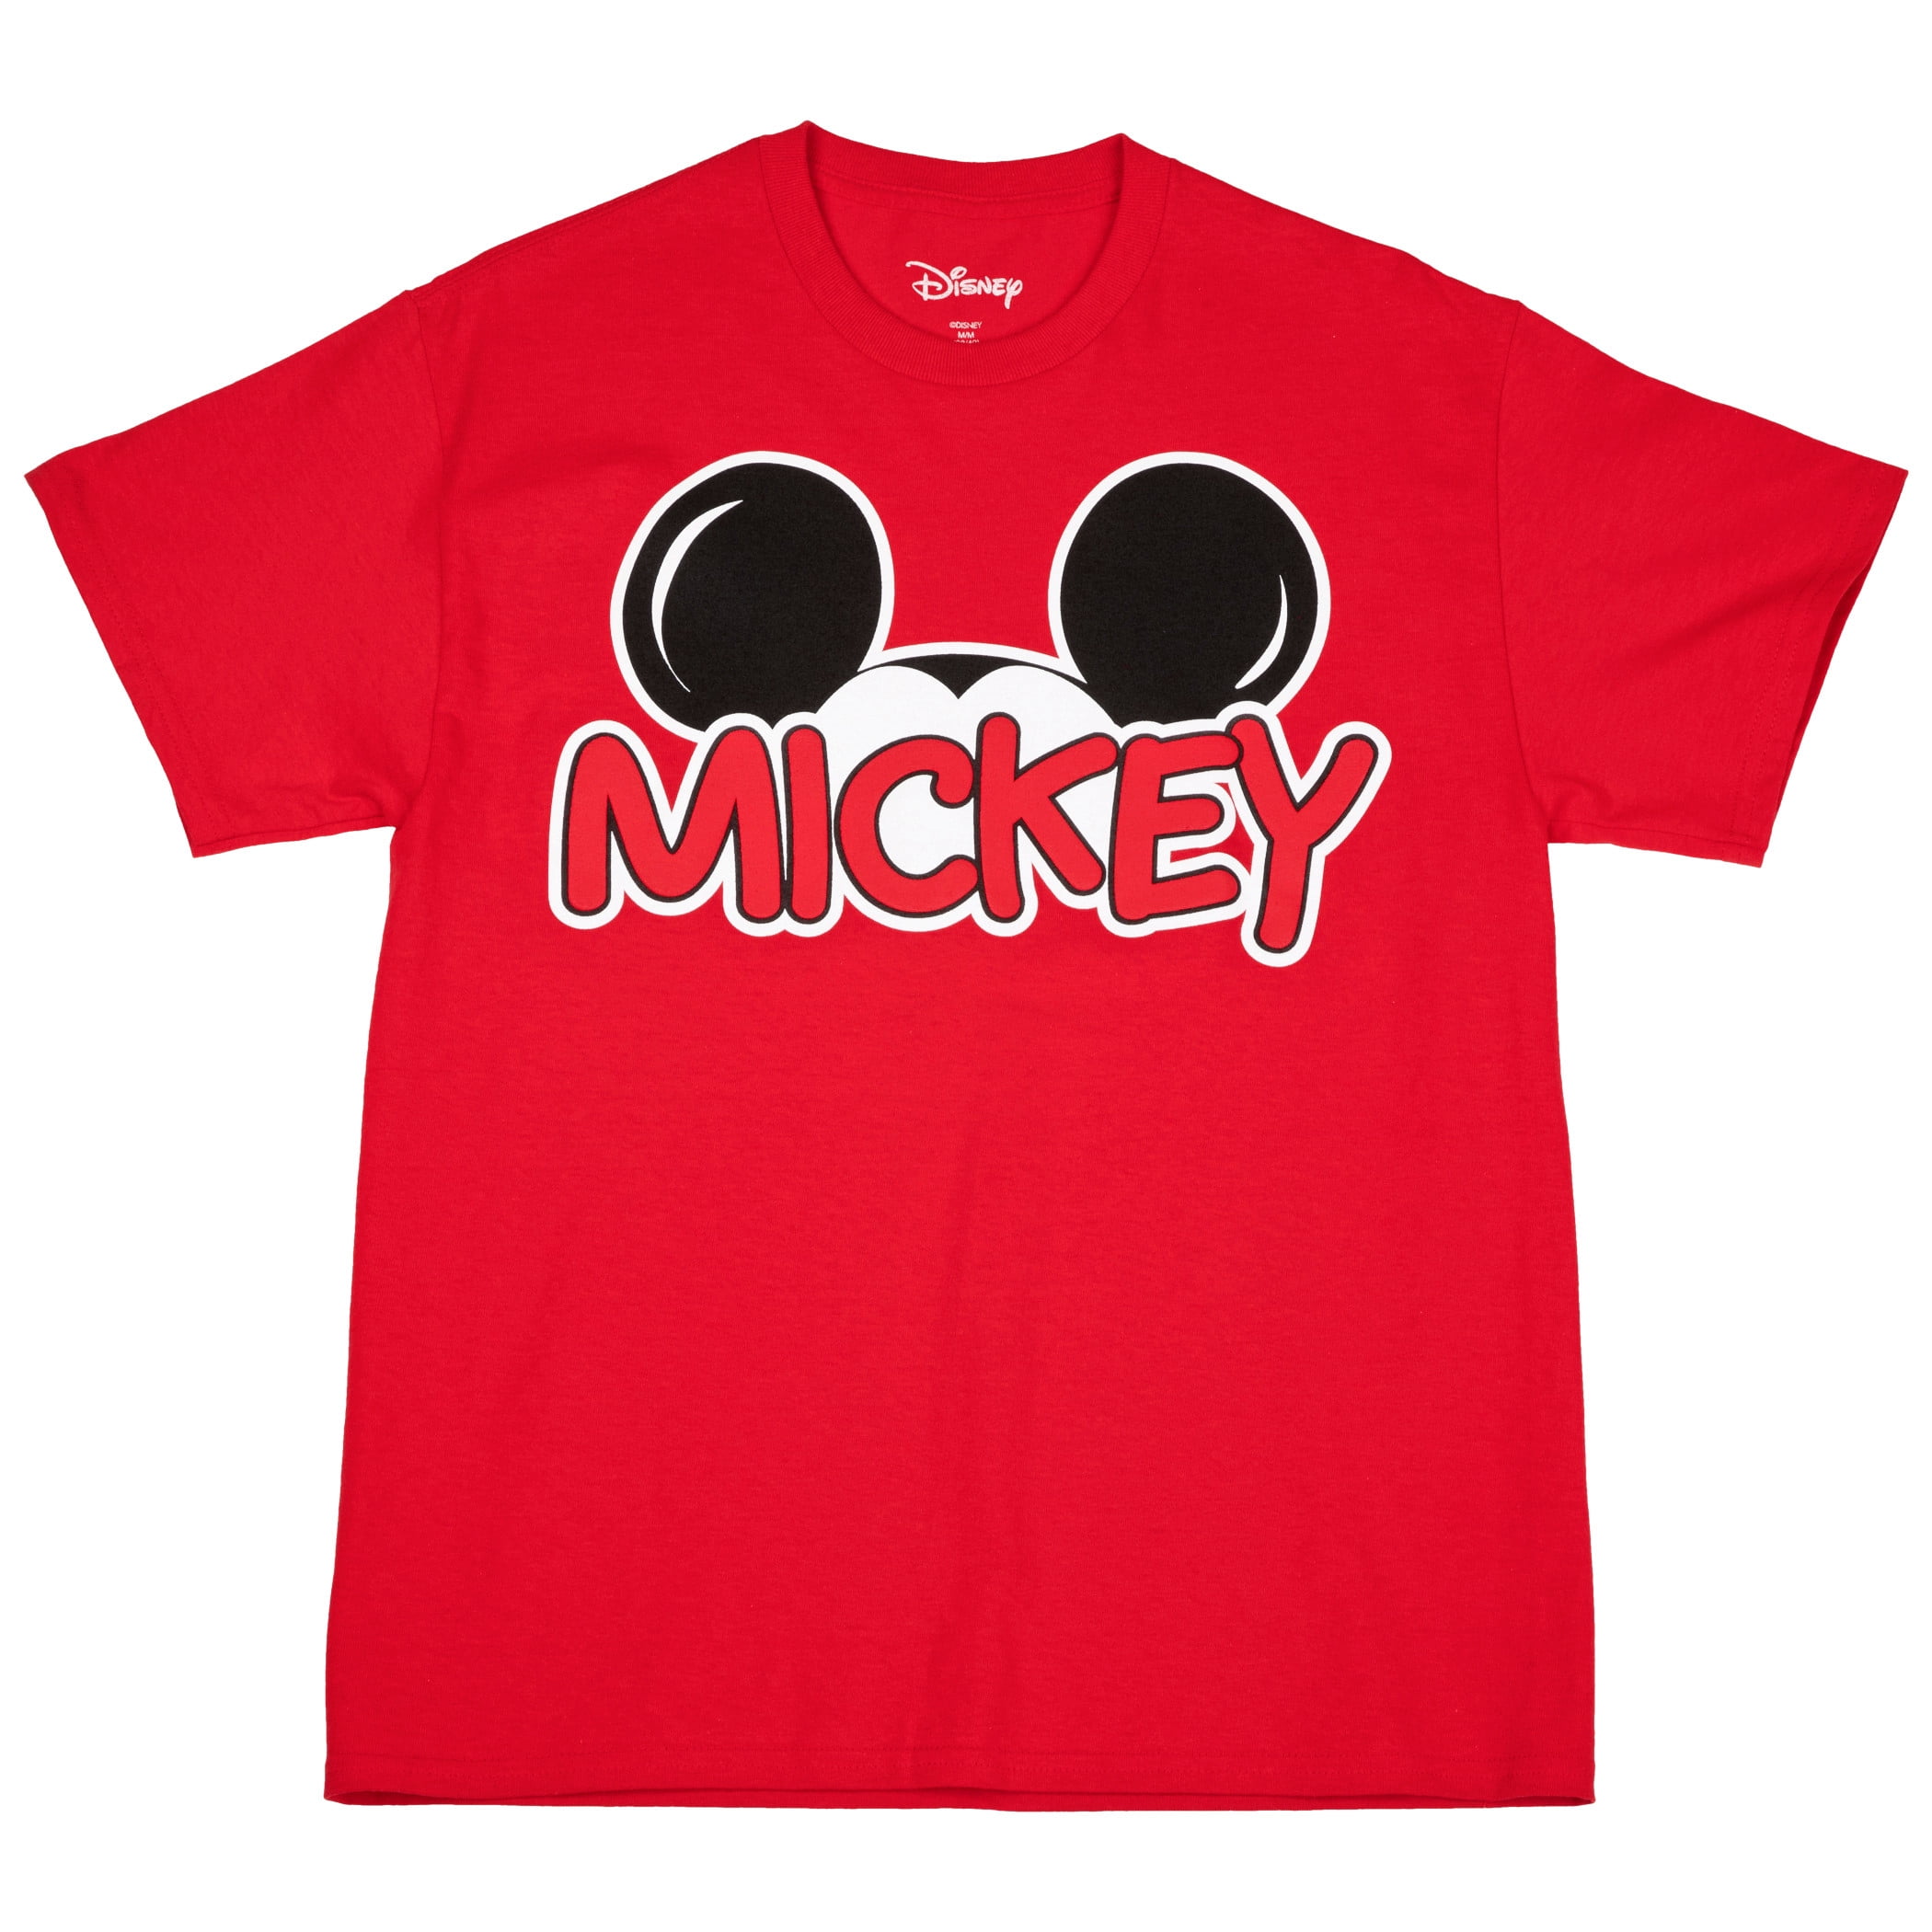 Disney Mickey Signature T-Shirt-XLarge Family Mouse Ears